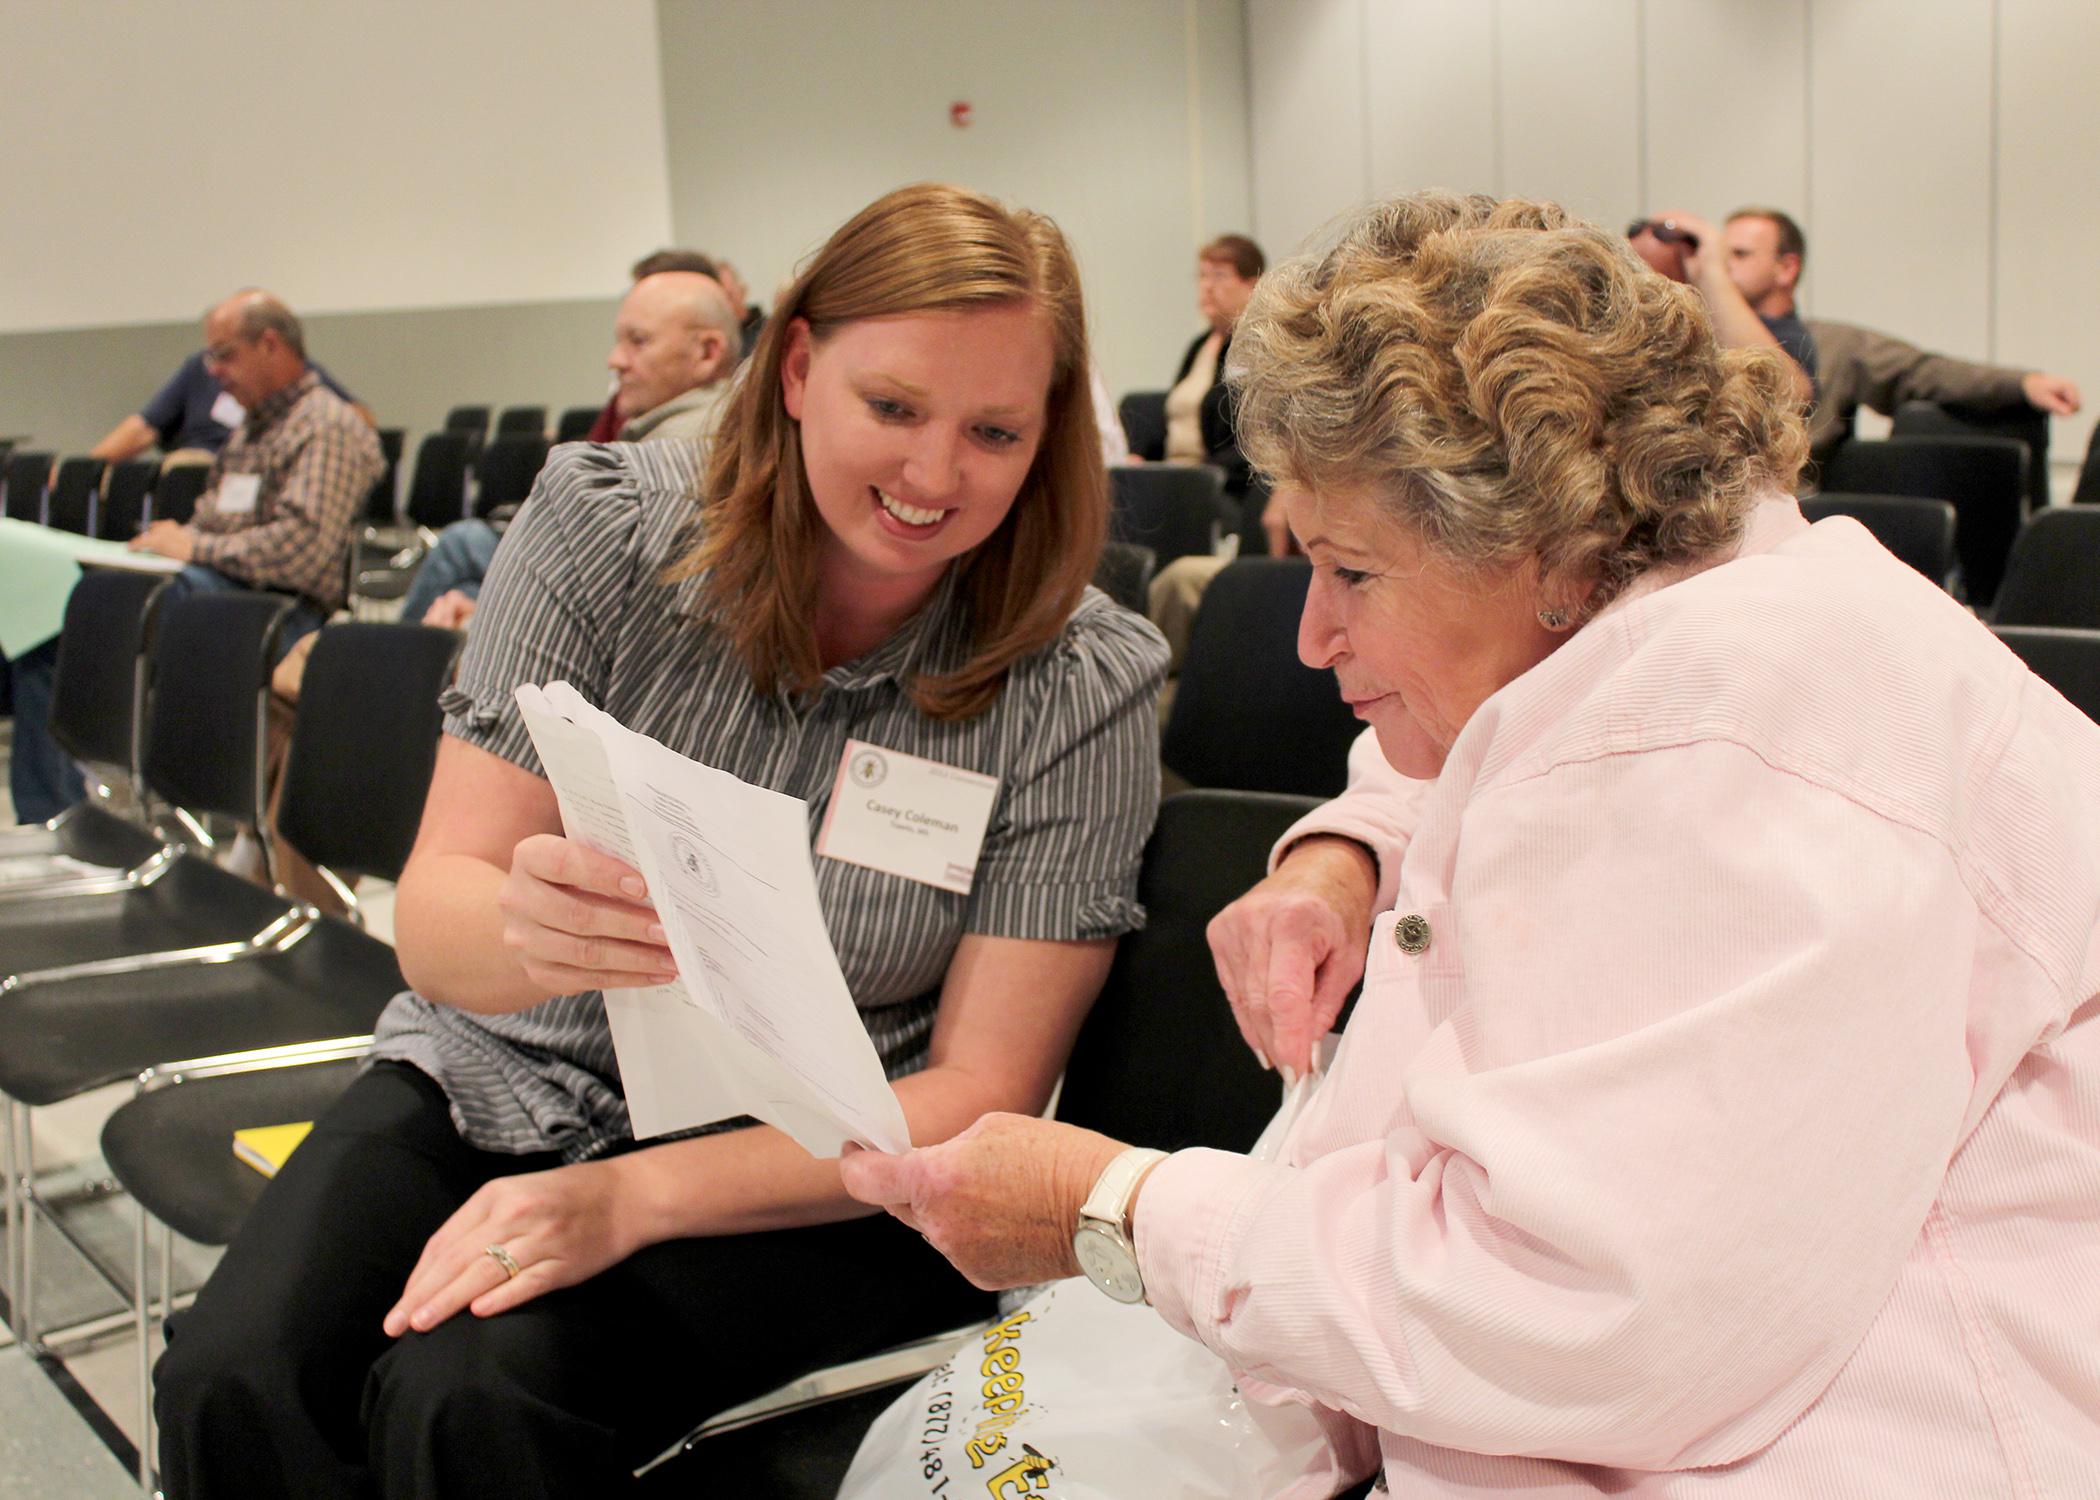 Casey Coleman of Tupelo and Patricia Pendergrass of Louisville review the agenda while waiting for the beginner beekeeper workshop to begin Friday, Oct. 26, 2012, at the annual Mississippi Beekeepers Association conference, held at Mississippi State University. (Photo by MSU Ag Communications/Keri Collins Lewis)